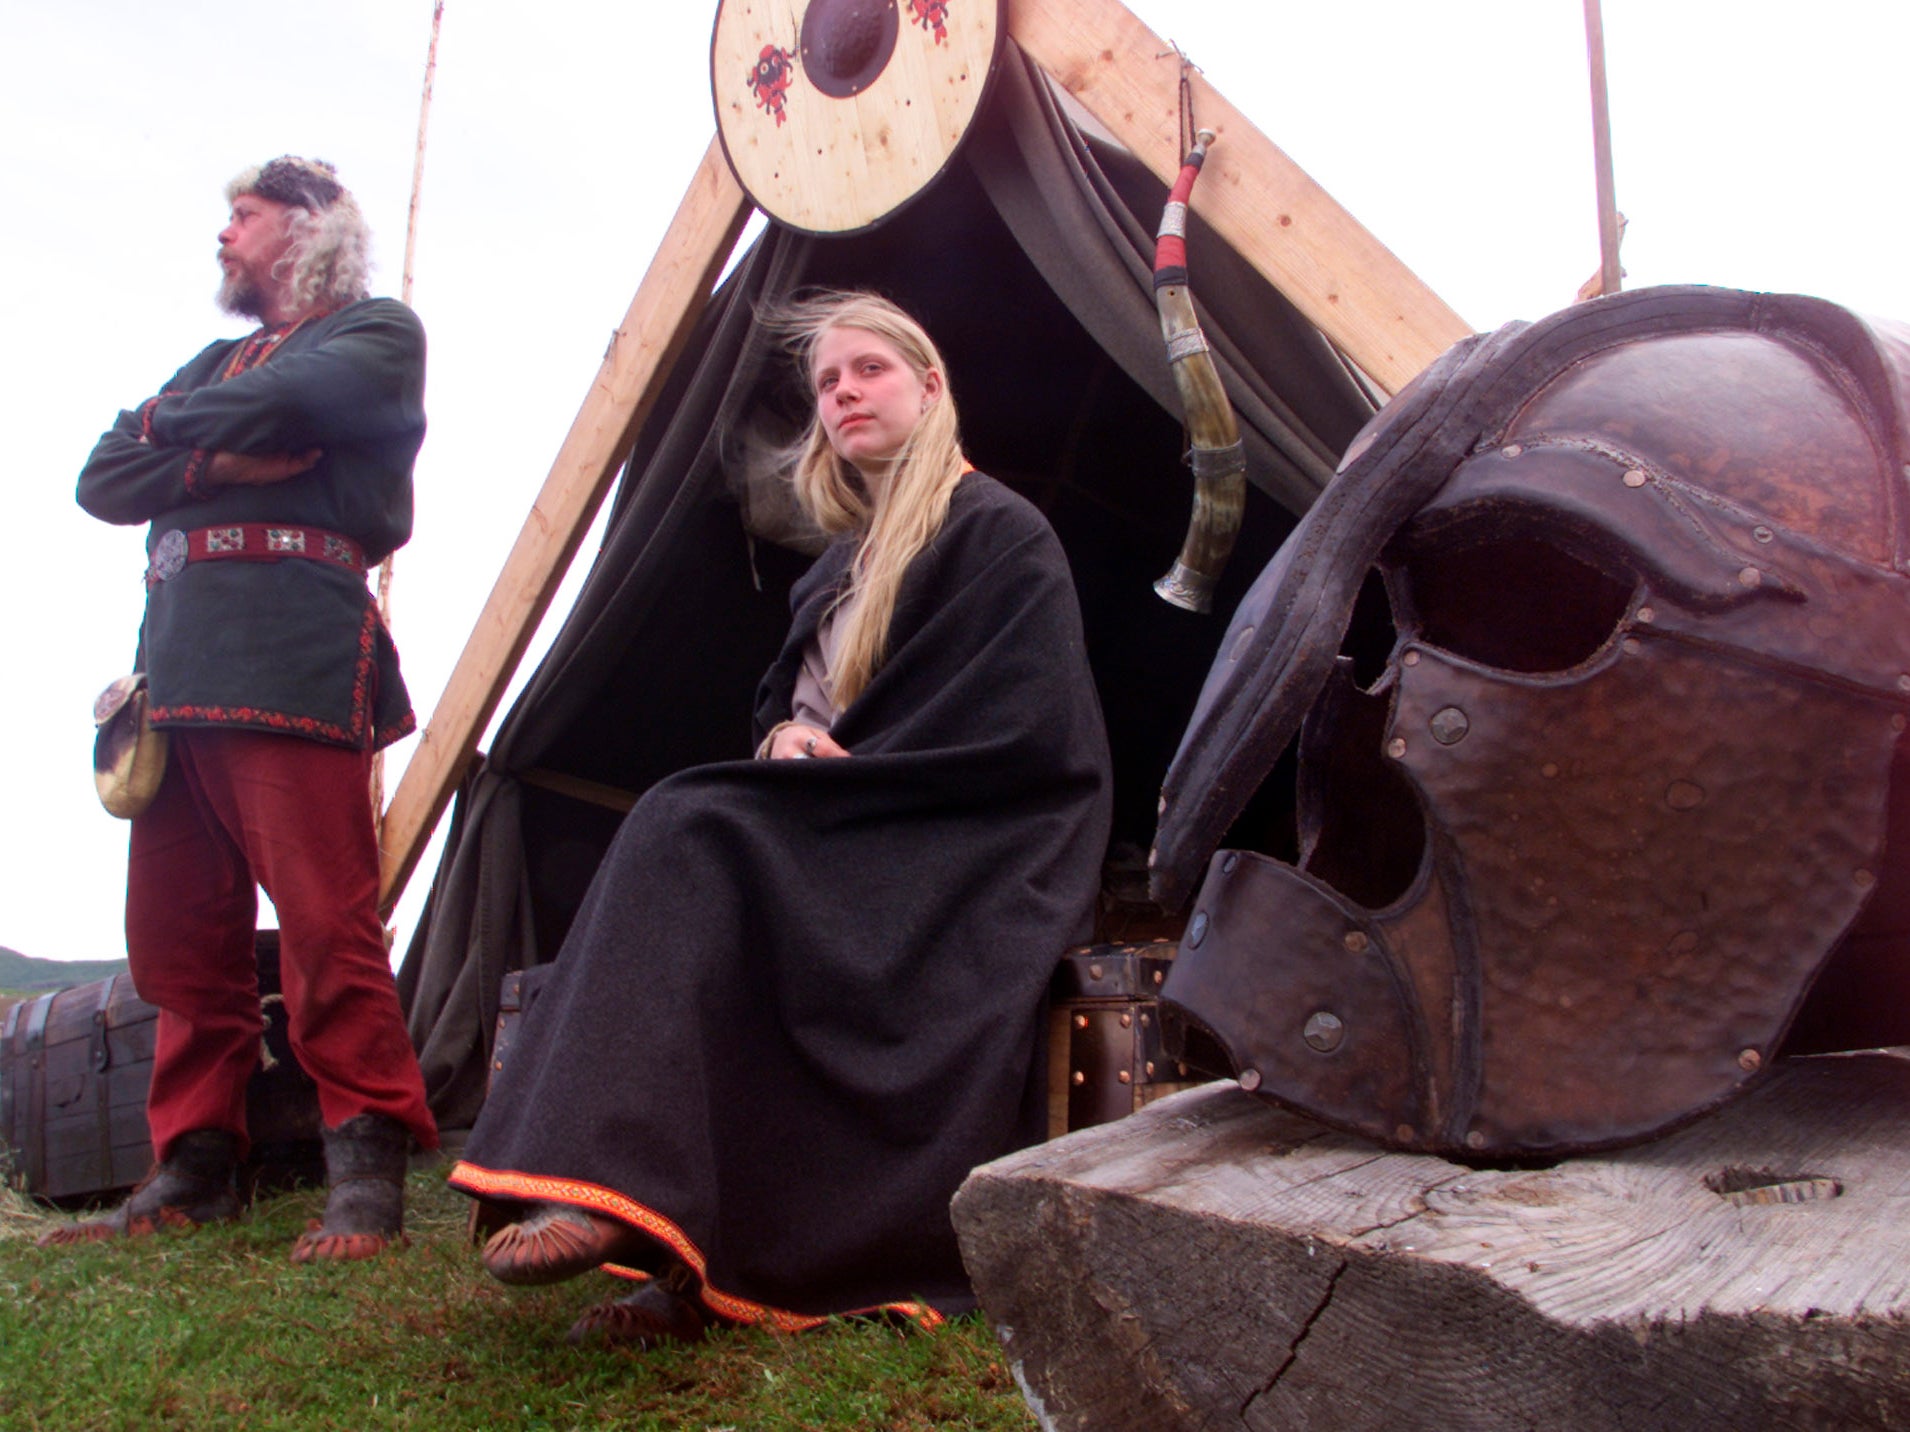 A father and daughter dressed as Vikings in L'Anse aux Meadows in Newfoundland, already known as an early European settlement